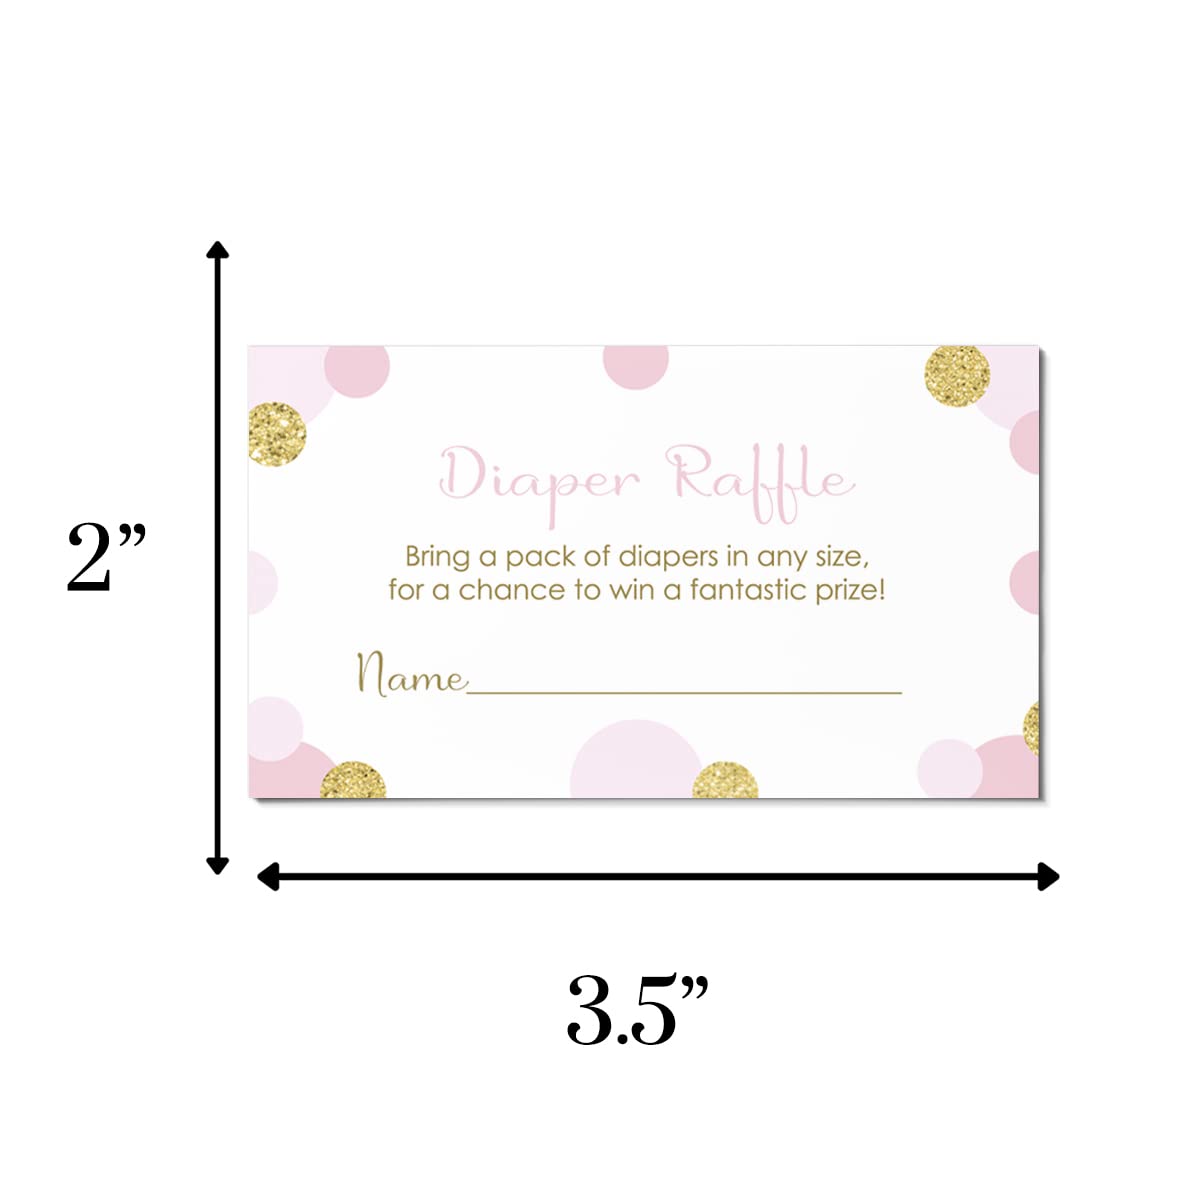 Paper Clever Party Pink and Gold Diaper Raffle Tickets (25 Pack) Girls Baby Shower Prize Drawing Games - Invitation Insert Cards Princess Twinkle Little Star 2x3.5 Set